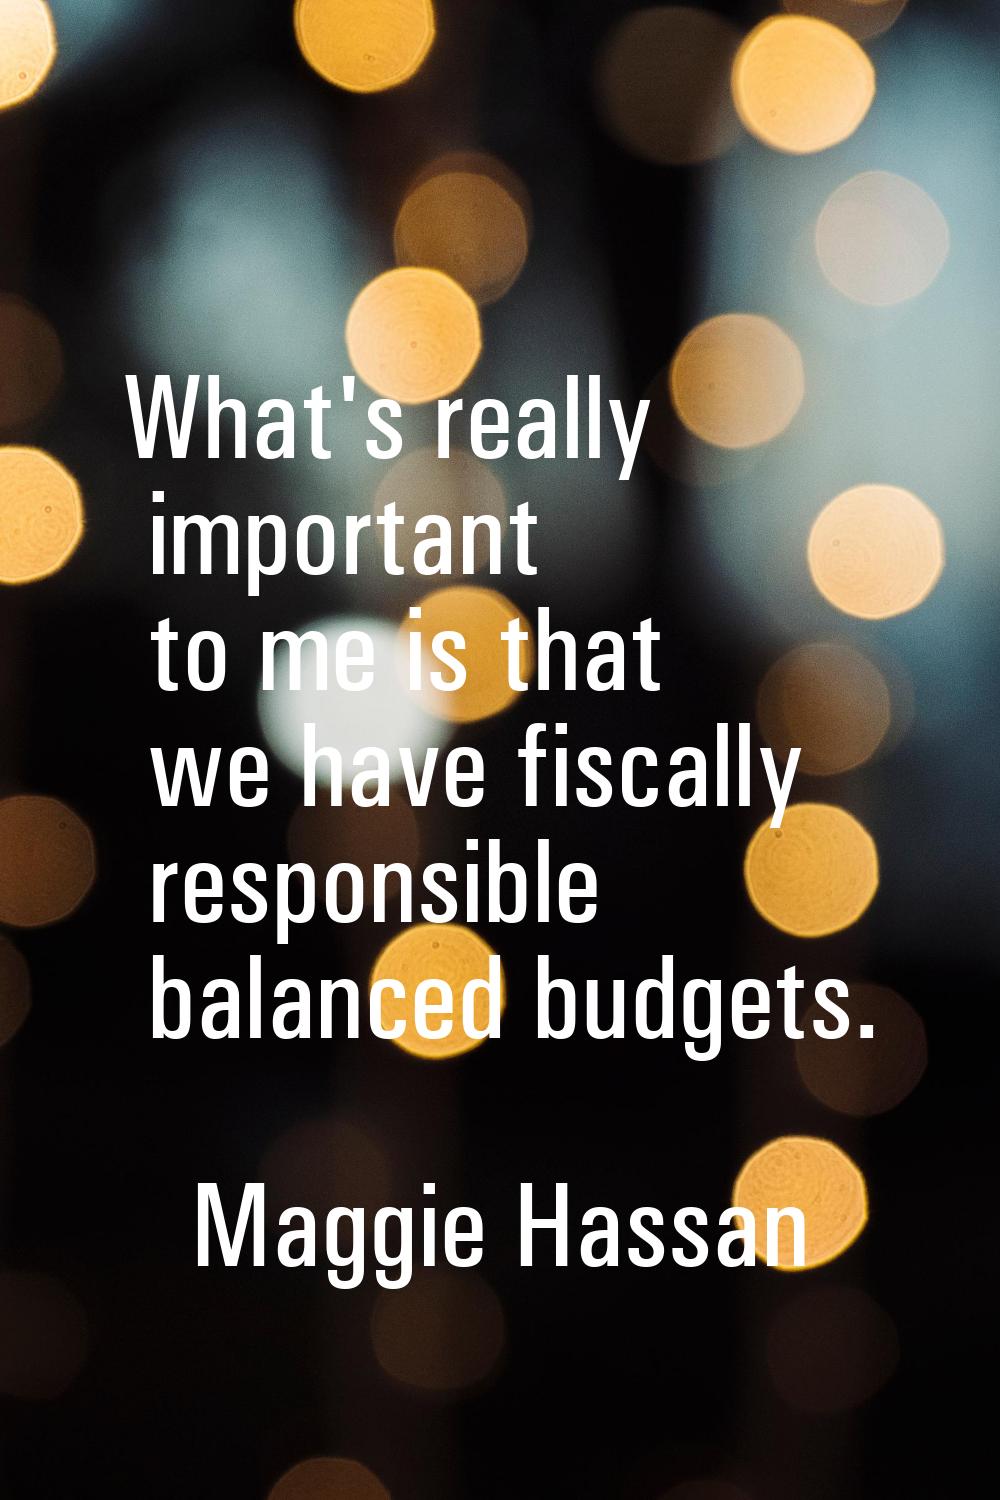 What's really important to me is that we have fiscally responsible balanced budgets.